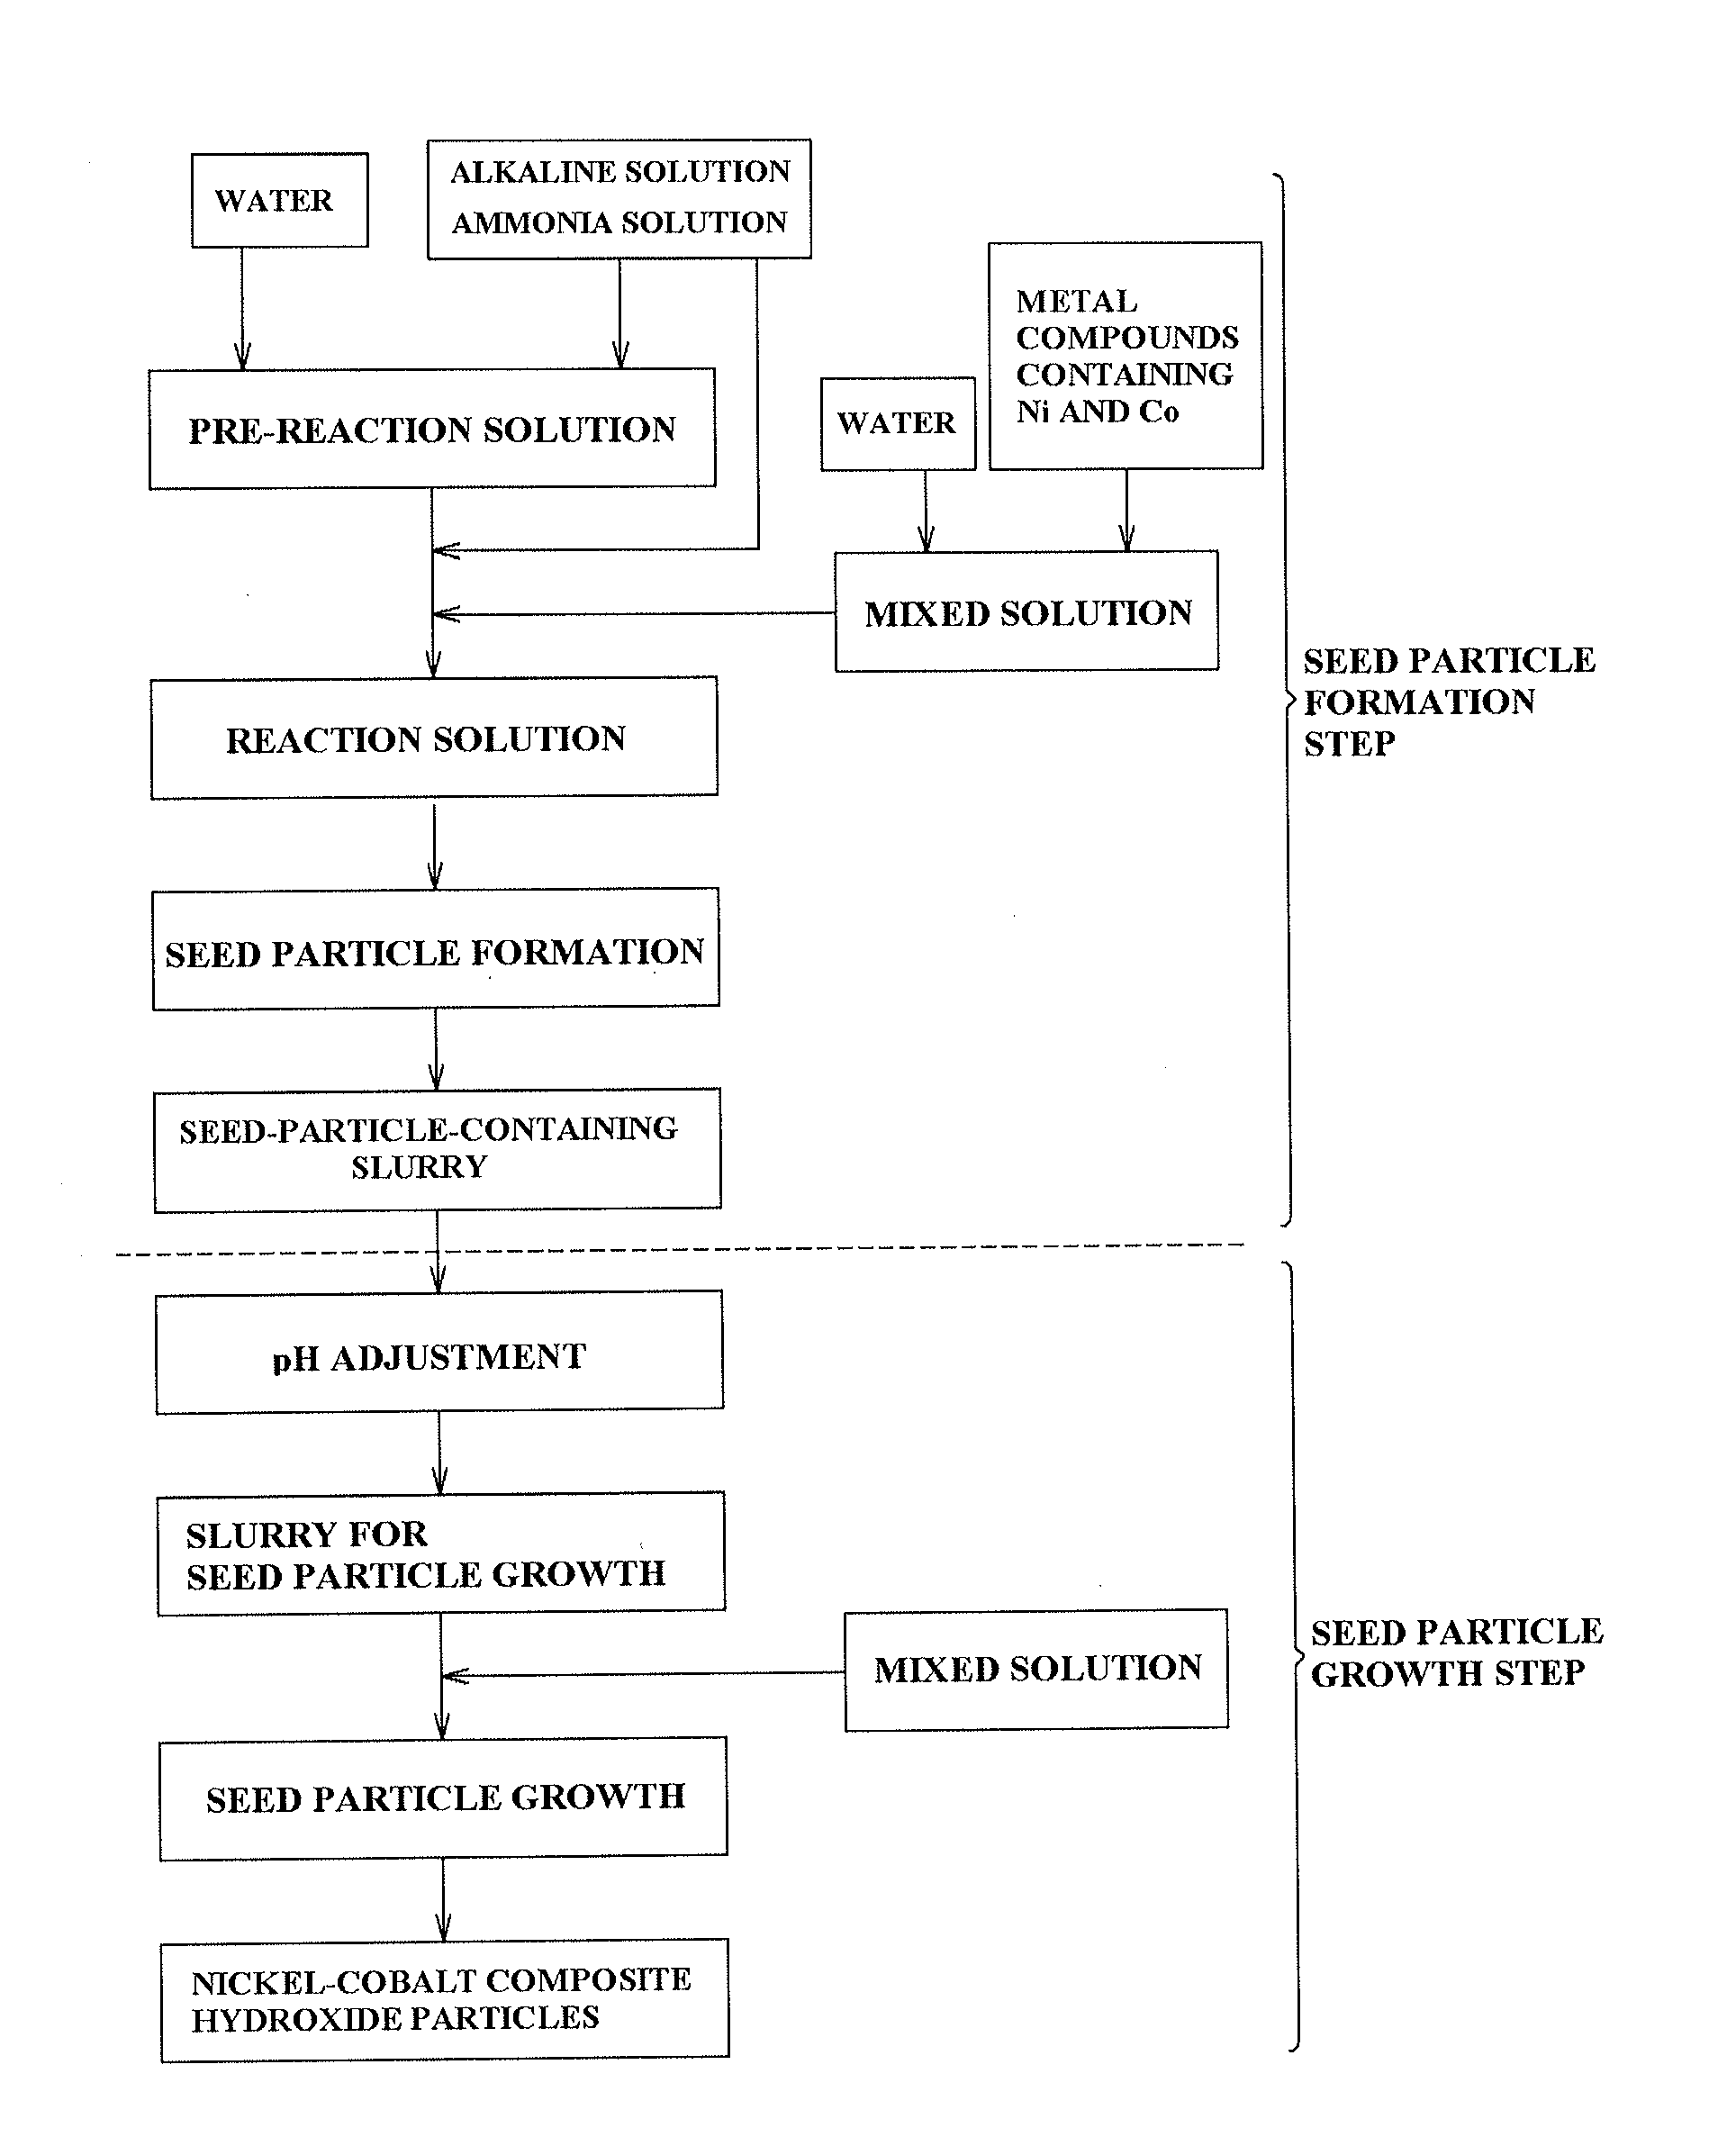 Nickel-cobalt composite hydroxide and process for manufacturing same